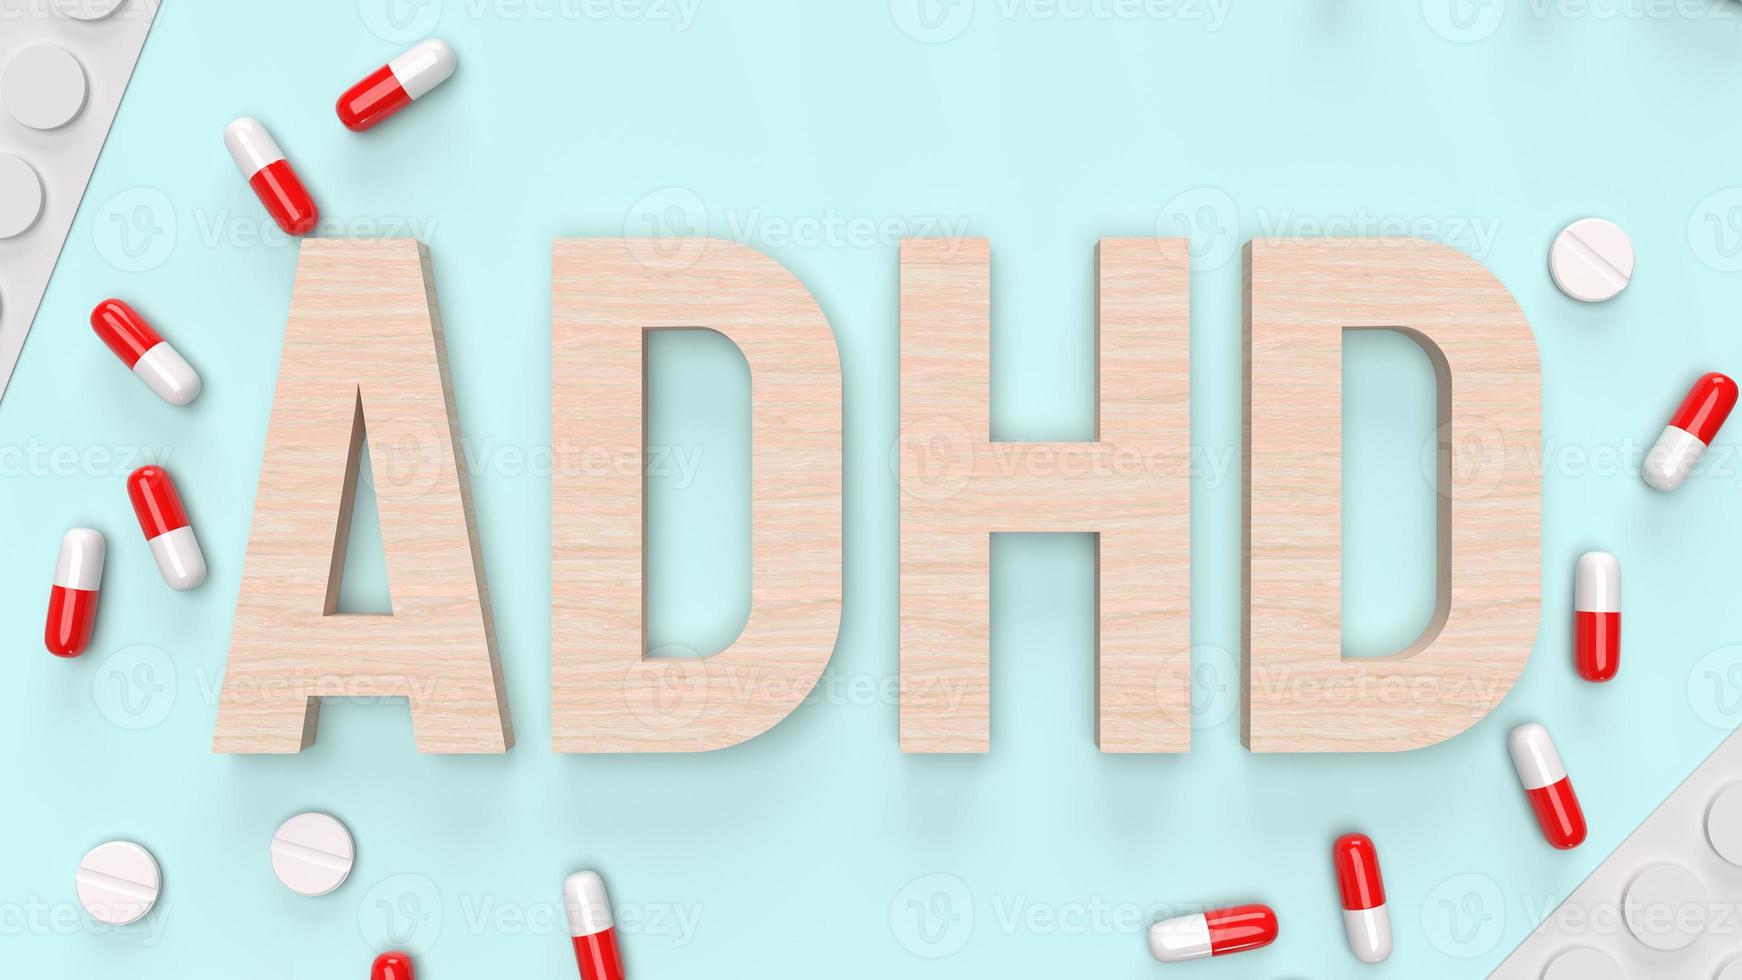 The adhd wood  text and drug for medical content 3d rendering photo